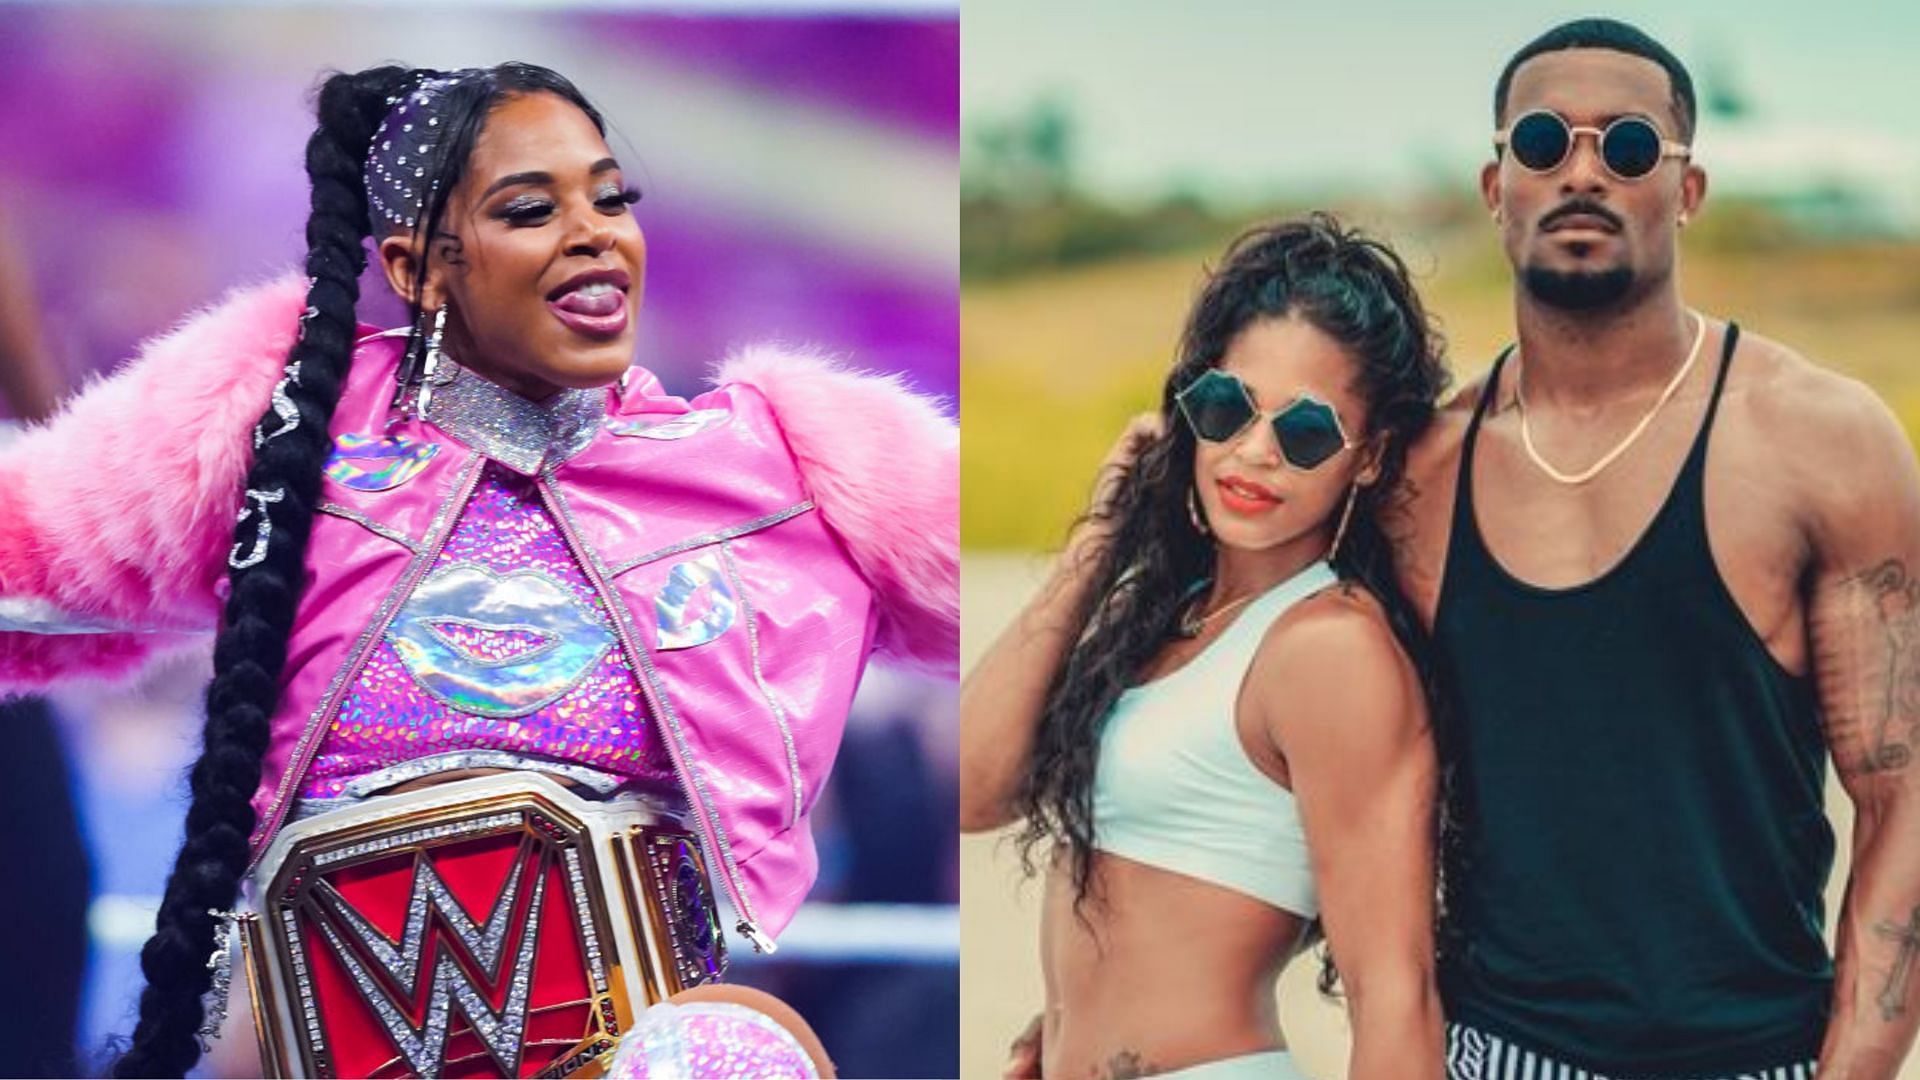 Bianca Belair and Montez Ford have been married for many years